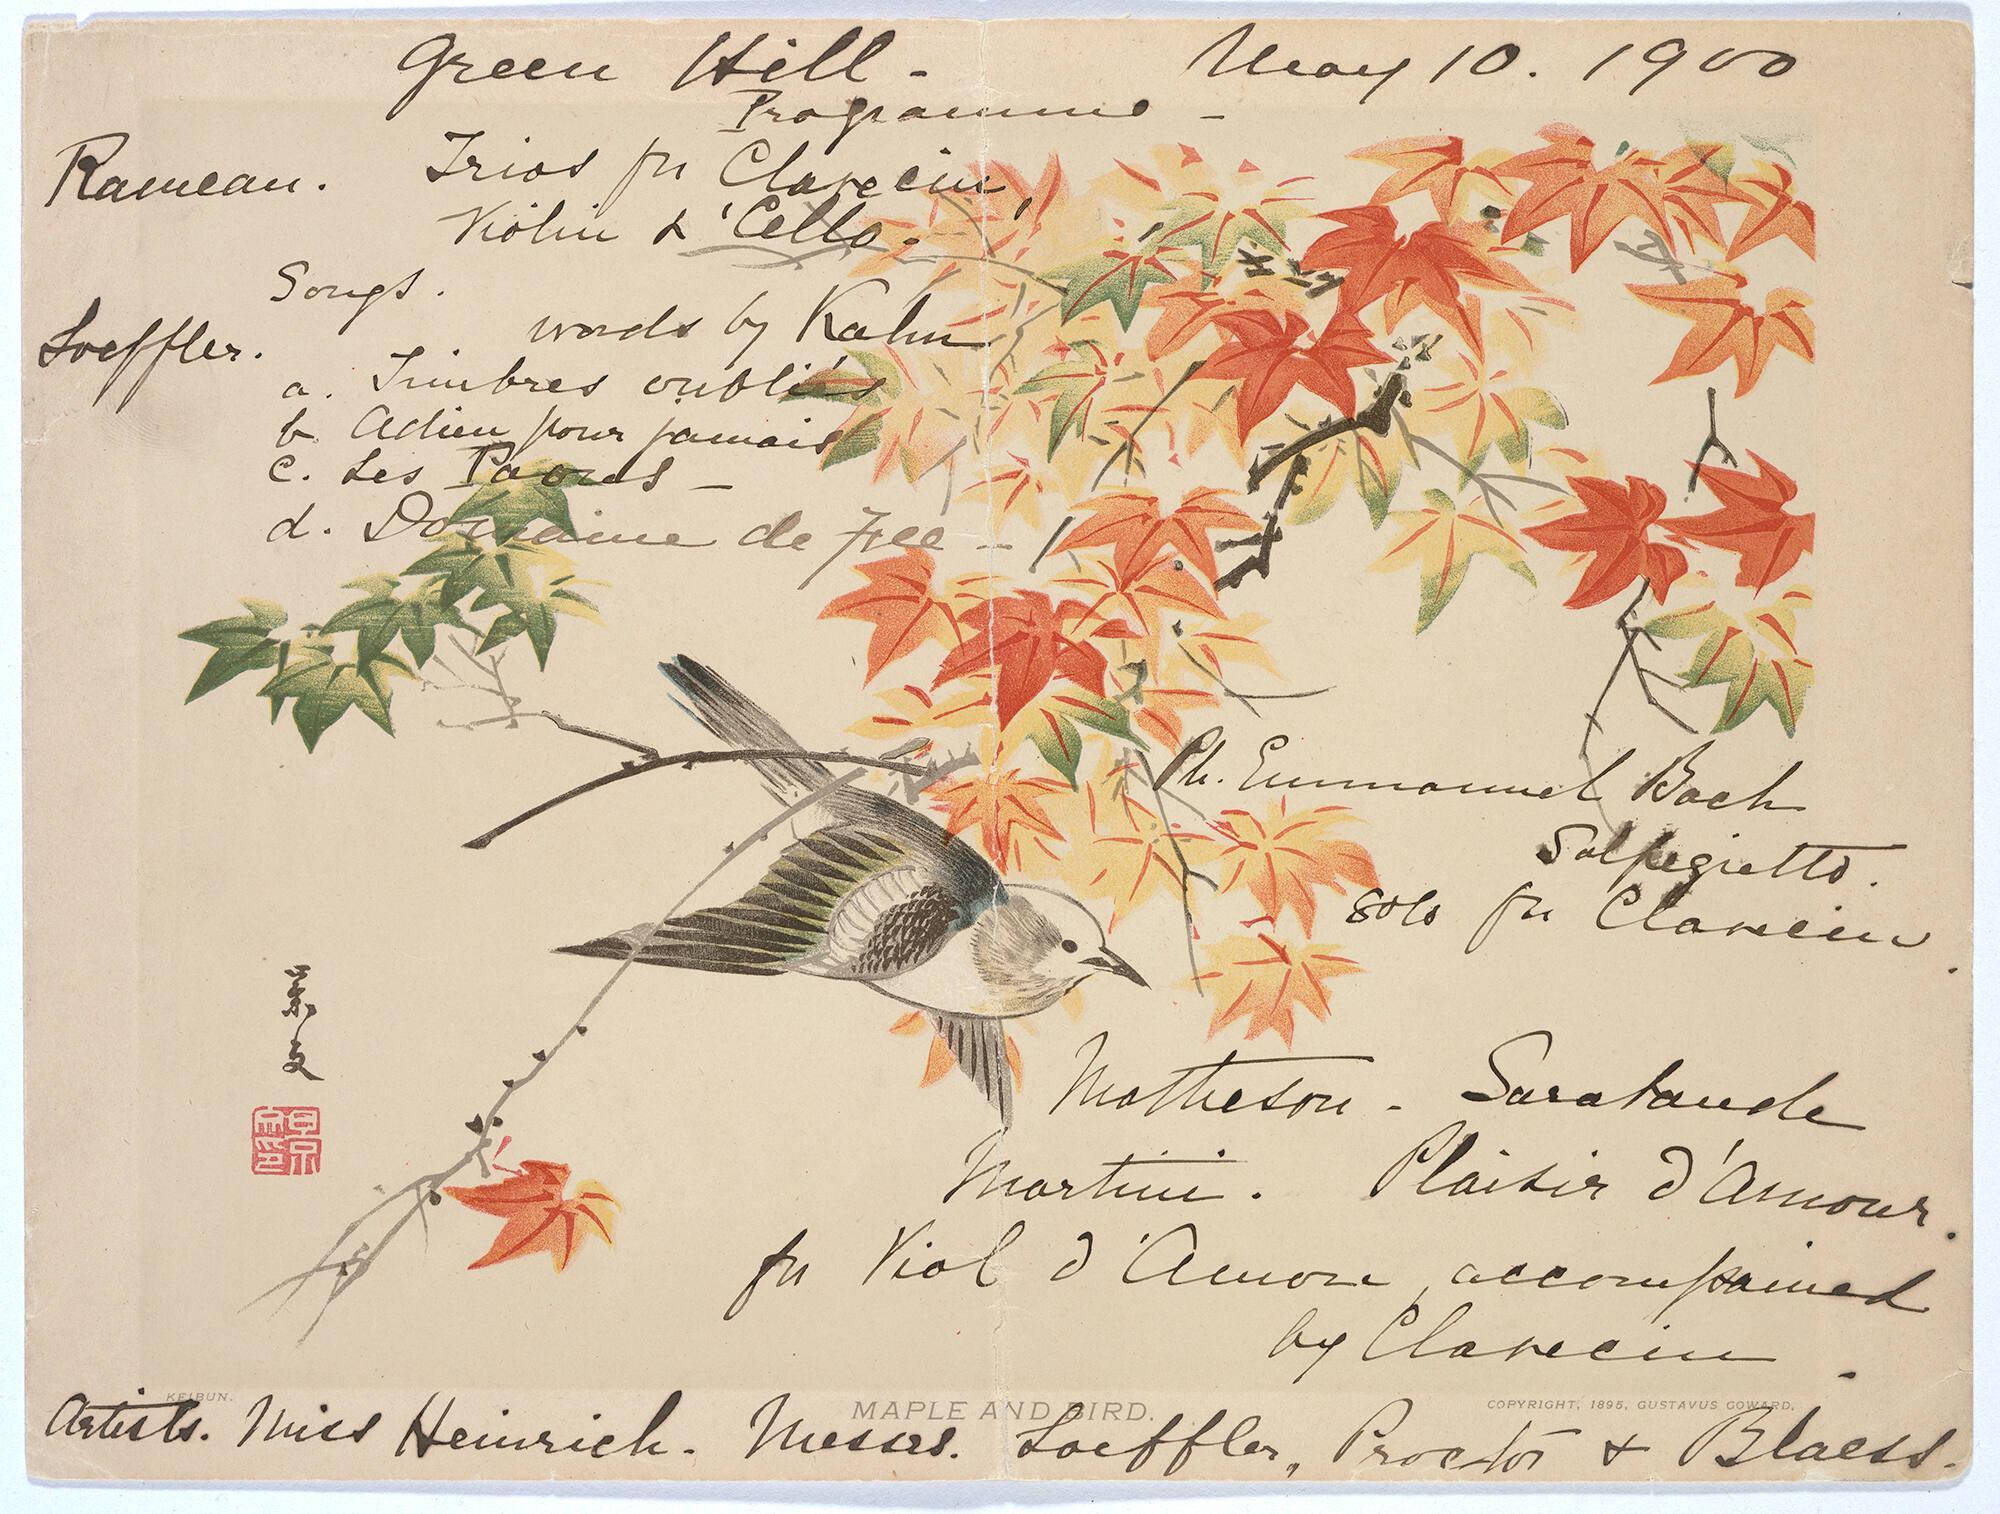 Concert Programme, Green Hill, with leaves and bird